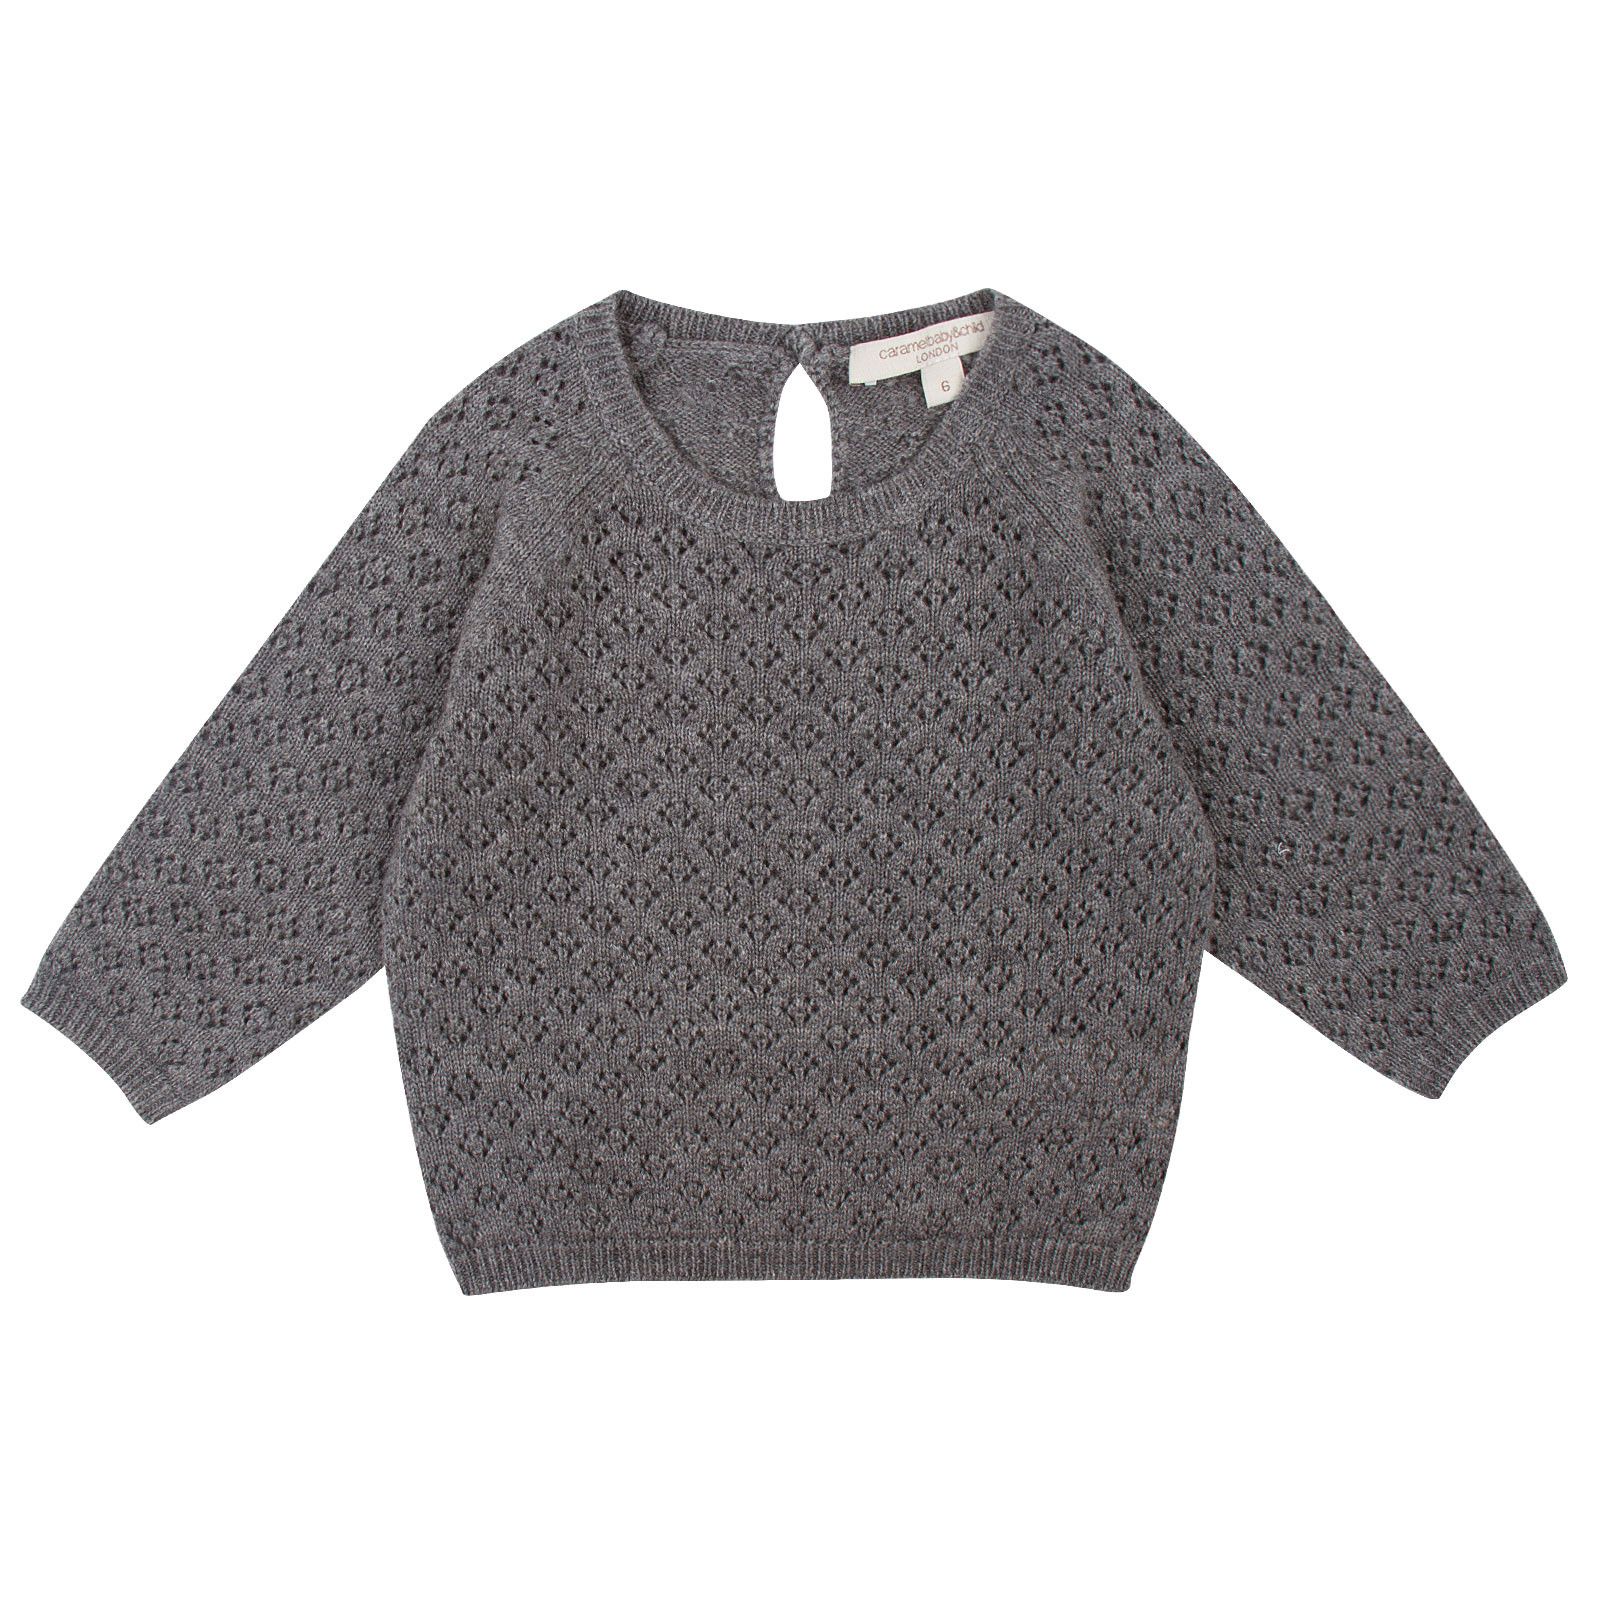 Baby Grey Knitted Wool&Cotton Tops & Bottoms set - CÉMAROSE | Children's Fashion Store - 1